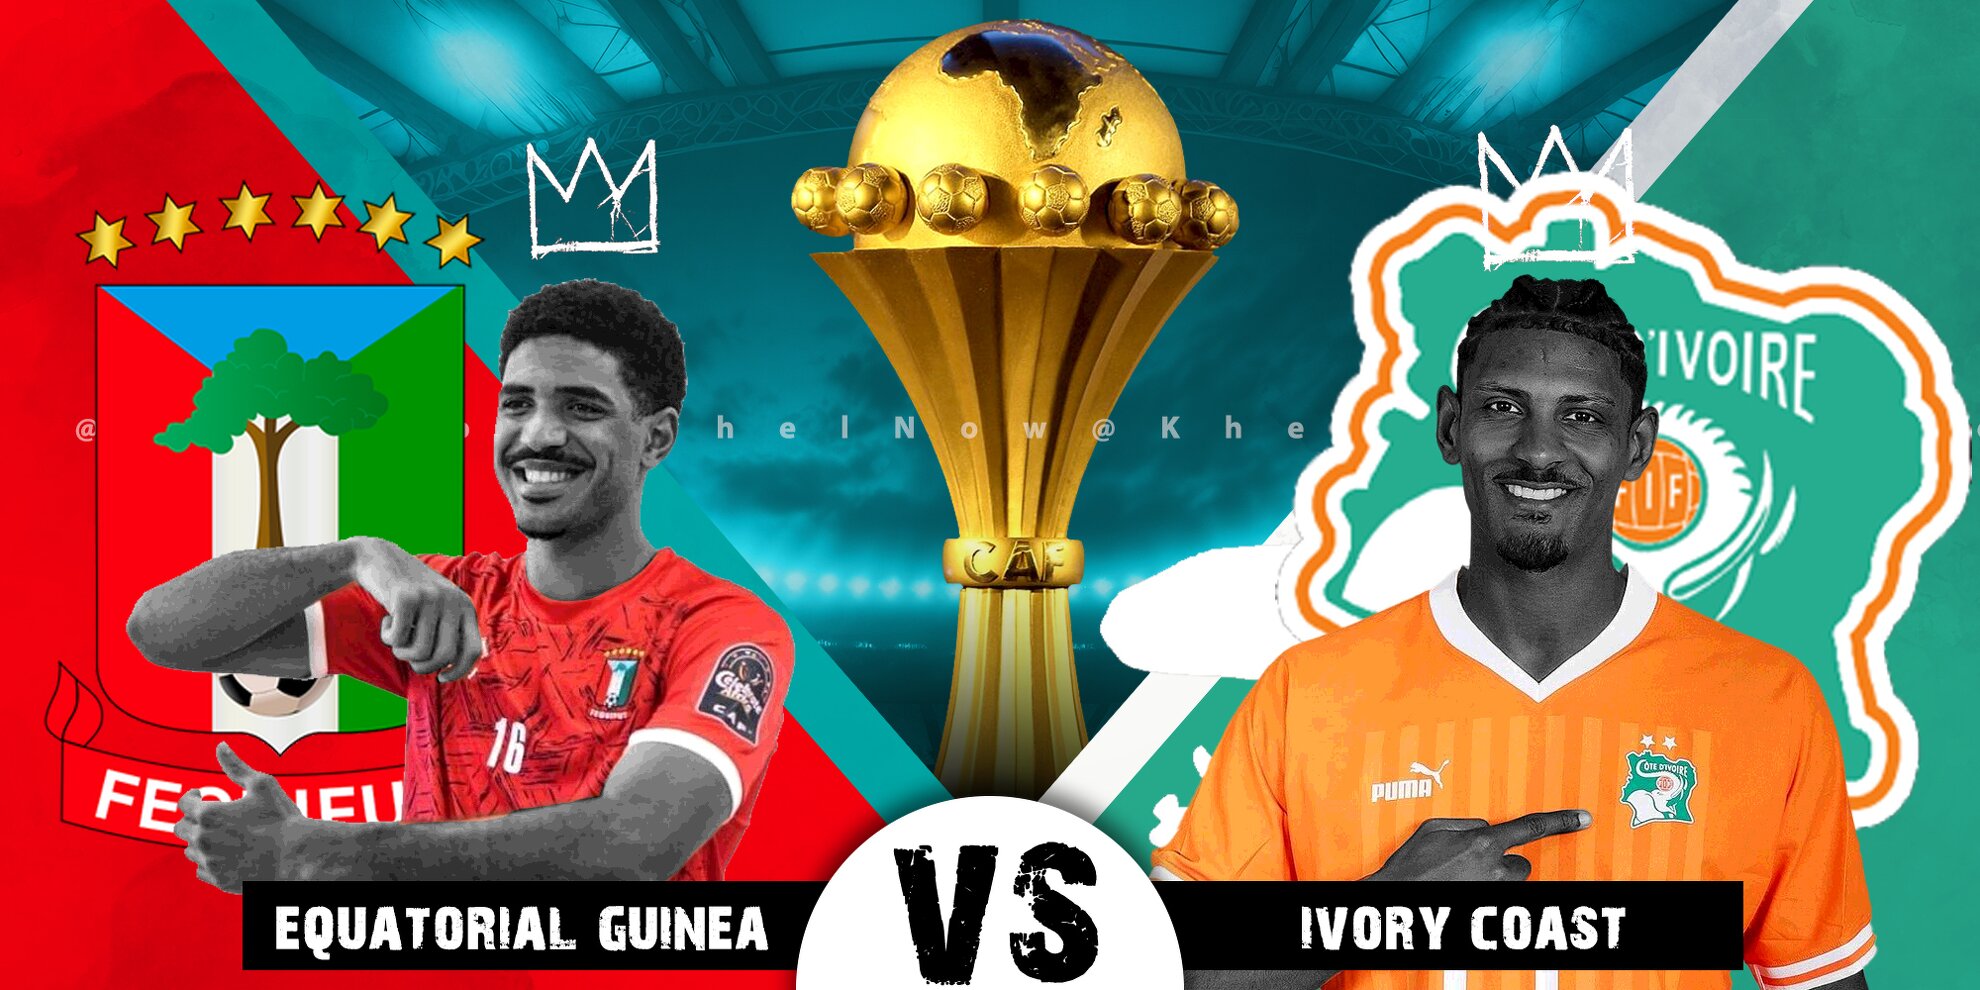 sokapro-AFCON: Equatorial Guinea takes on Ivory Coast tonight. Will the host nation be able to progress from the group stages tonight?